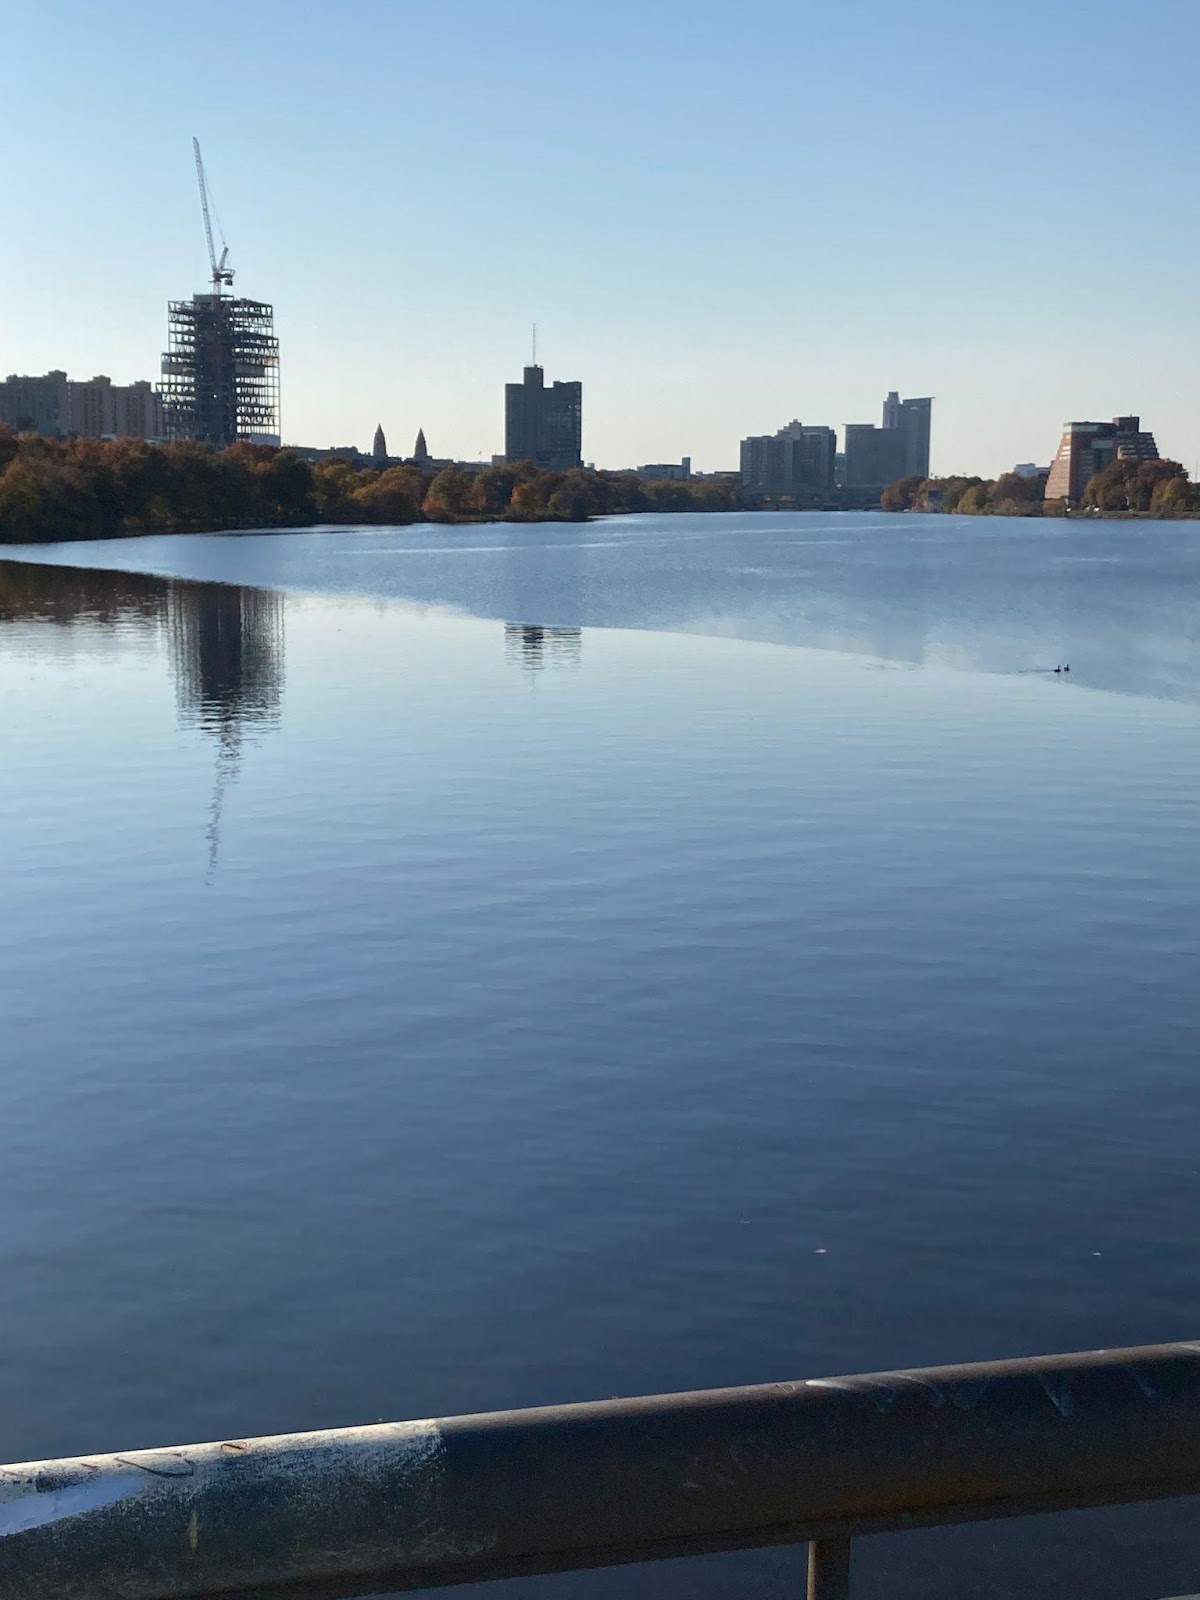 A serene view of the Charles River and the Boston/Cambridge horizon.